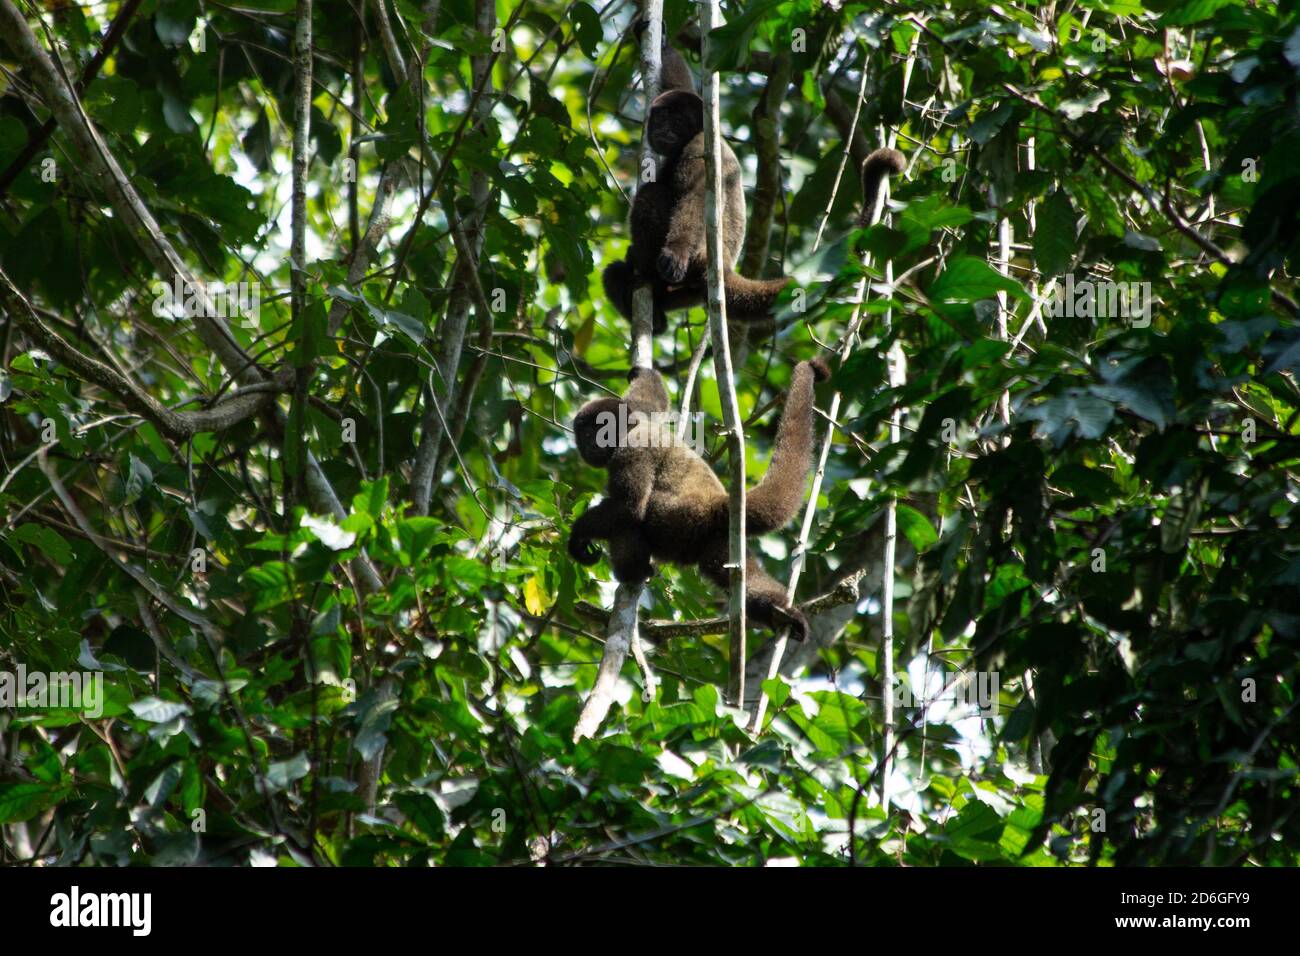 Pair of woolly monkeys, Lagothrix lagotricha, climbing a tree in Manu National Park, Peru. Woolly monkeys in large tropical rainforest tree Stock Photo